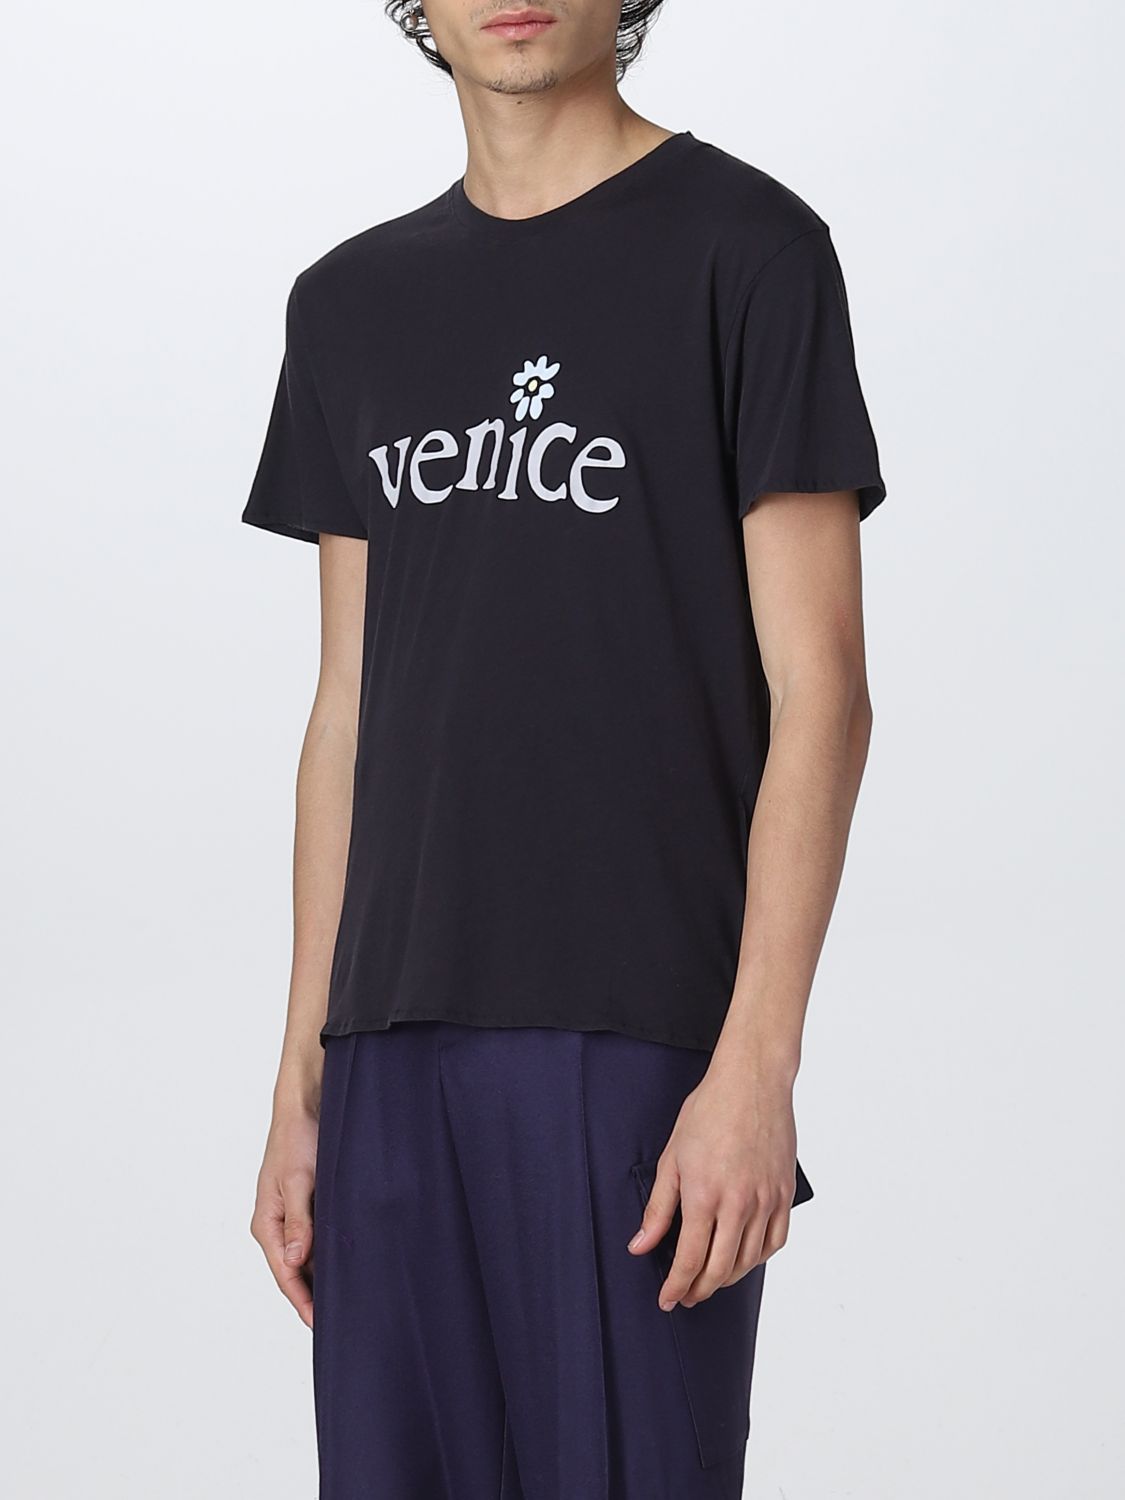 T-shirt Erl: T-shirt Erl con stampa venice nero 4